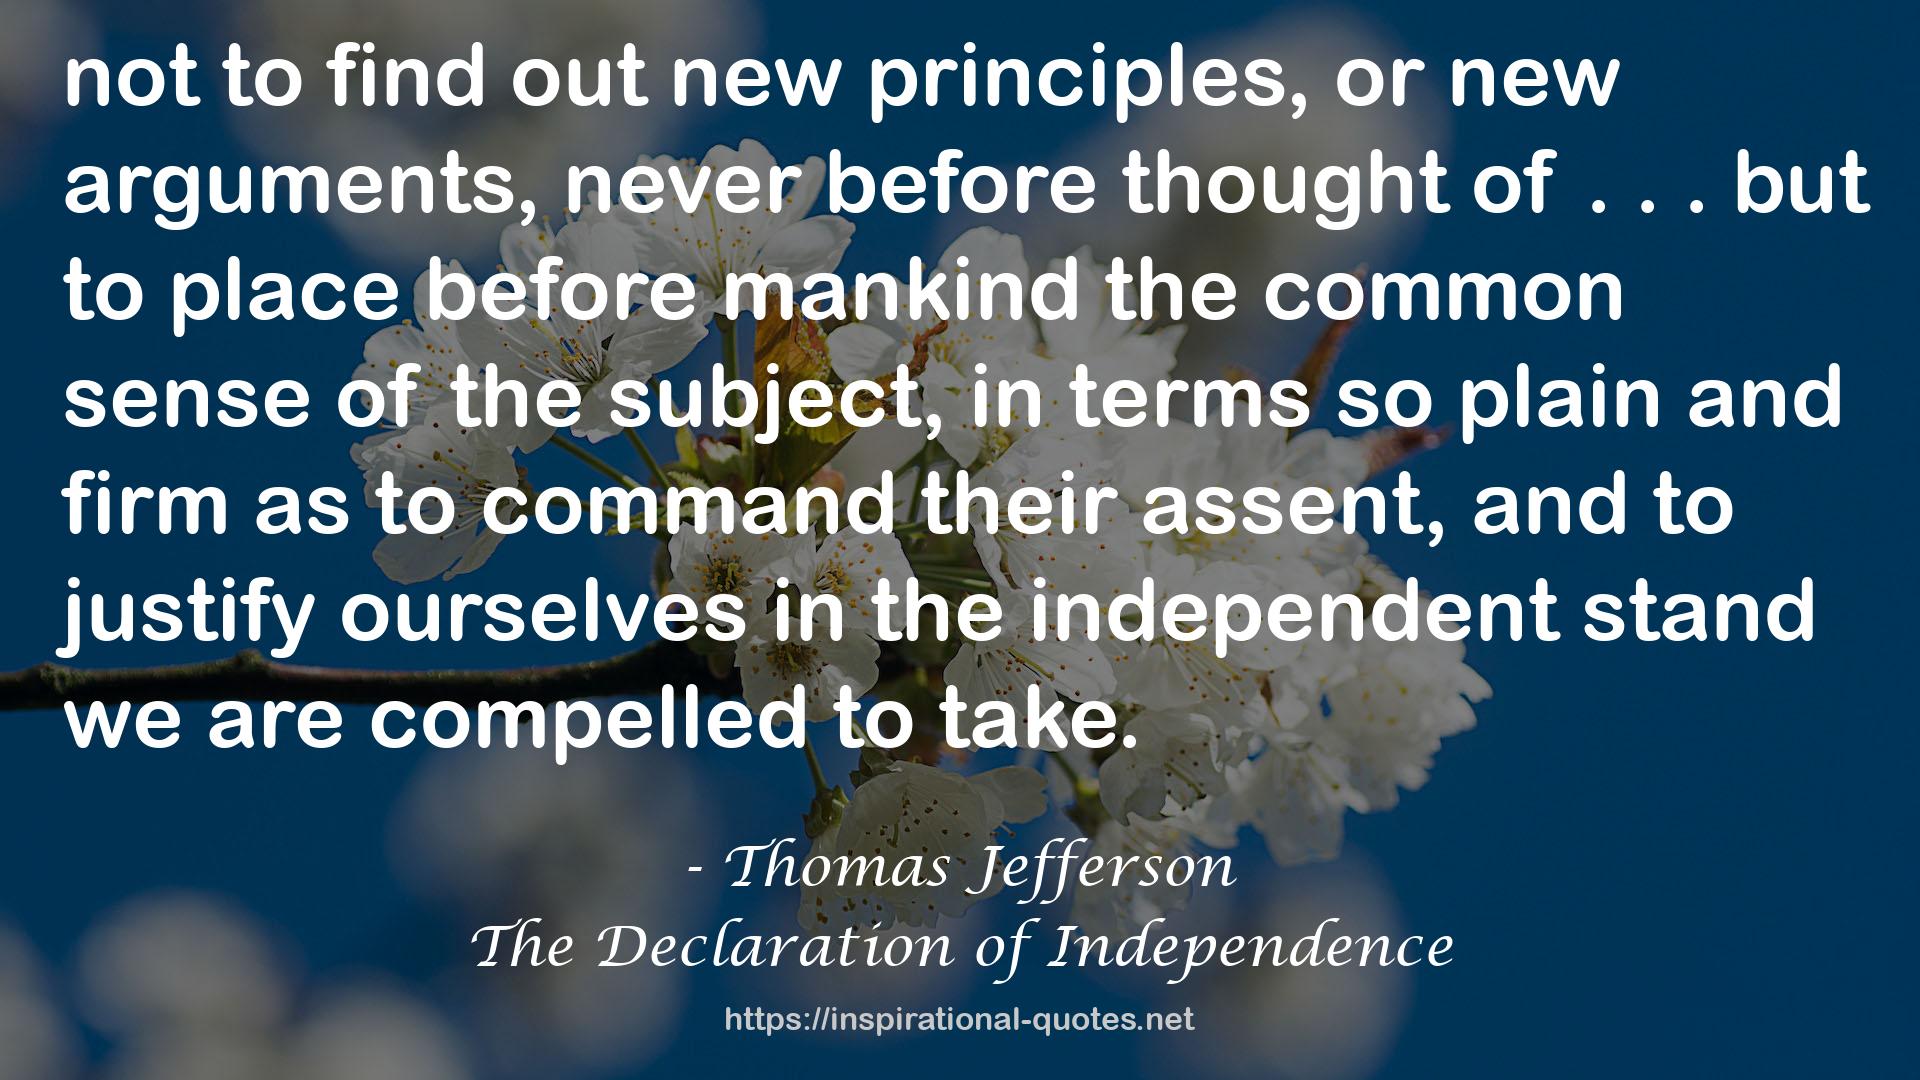 The Declaration of Independence QUOTES